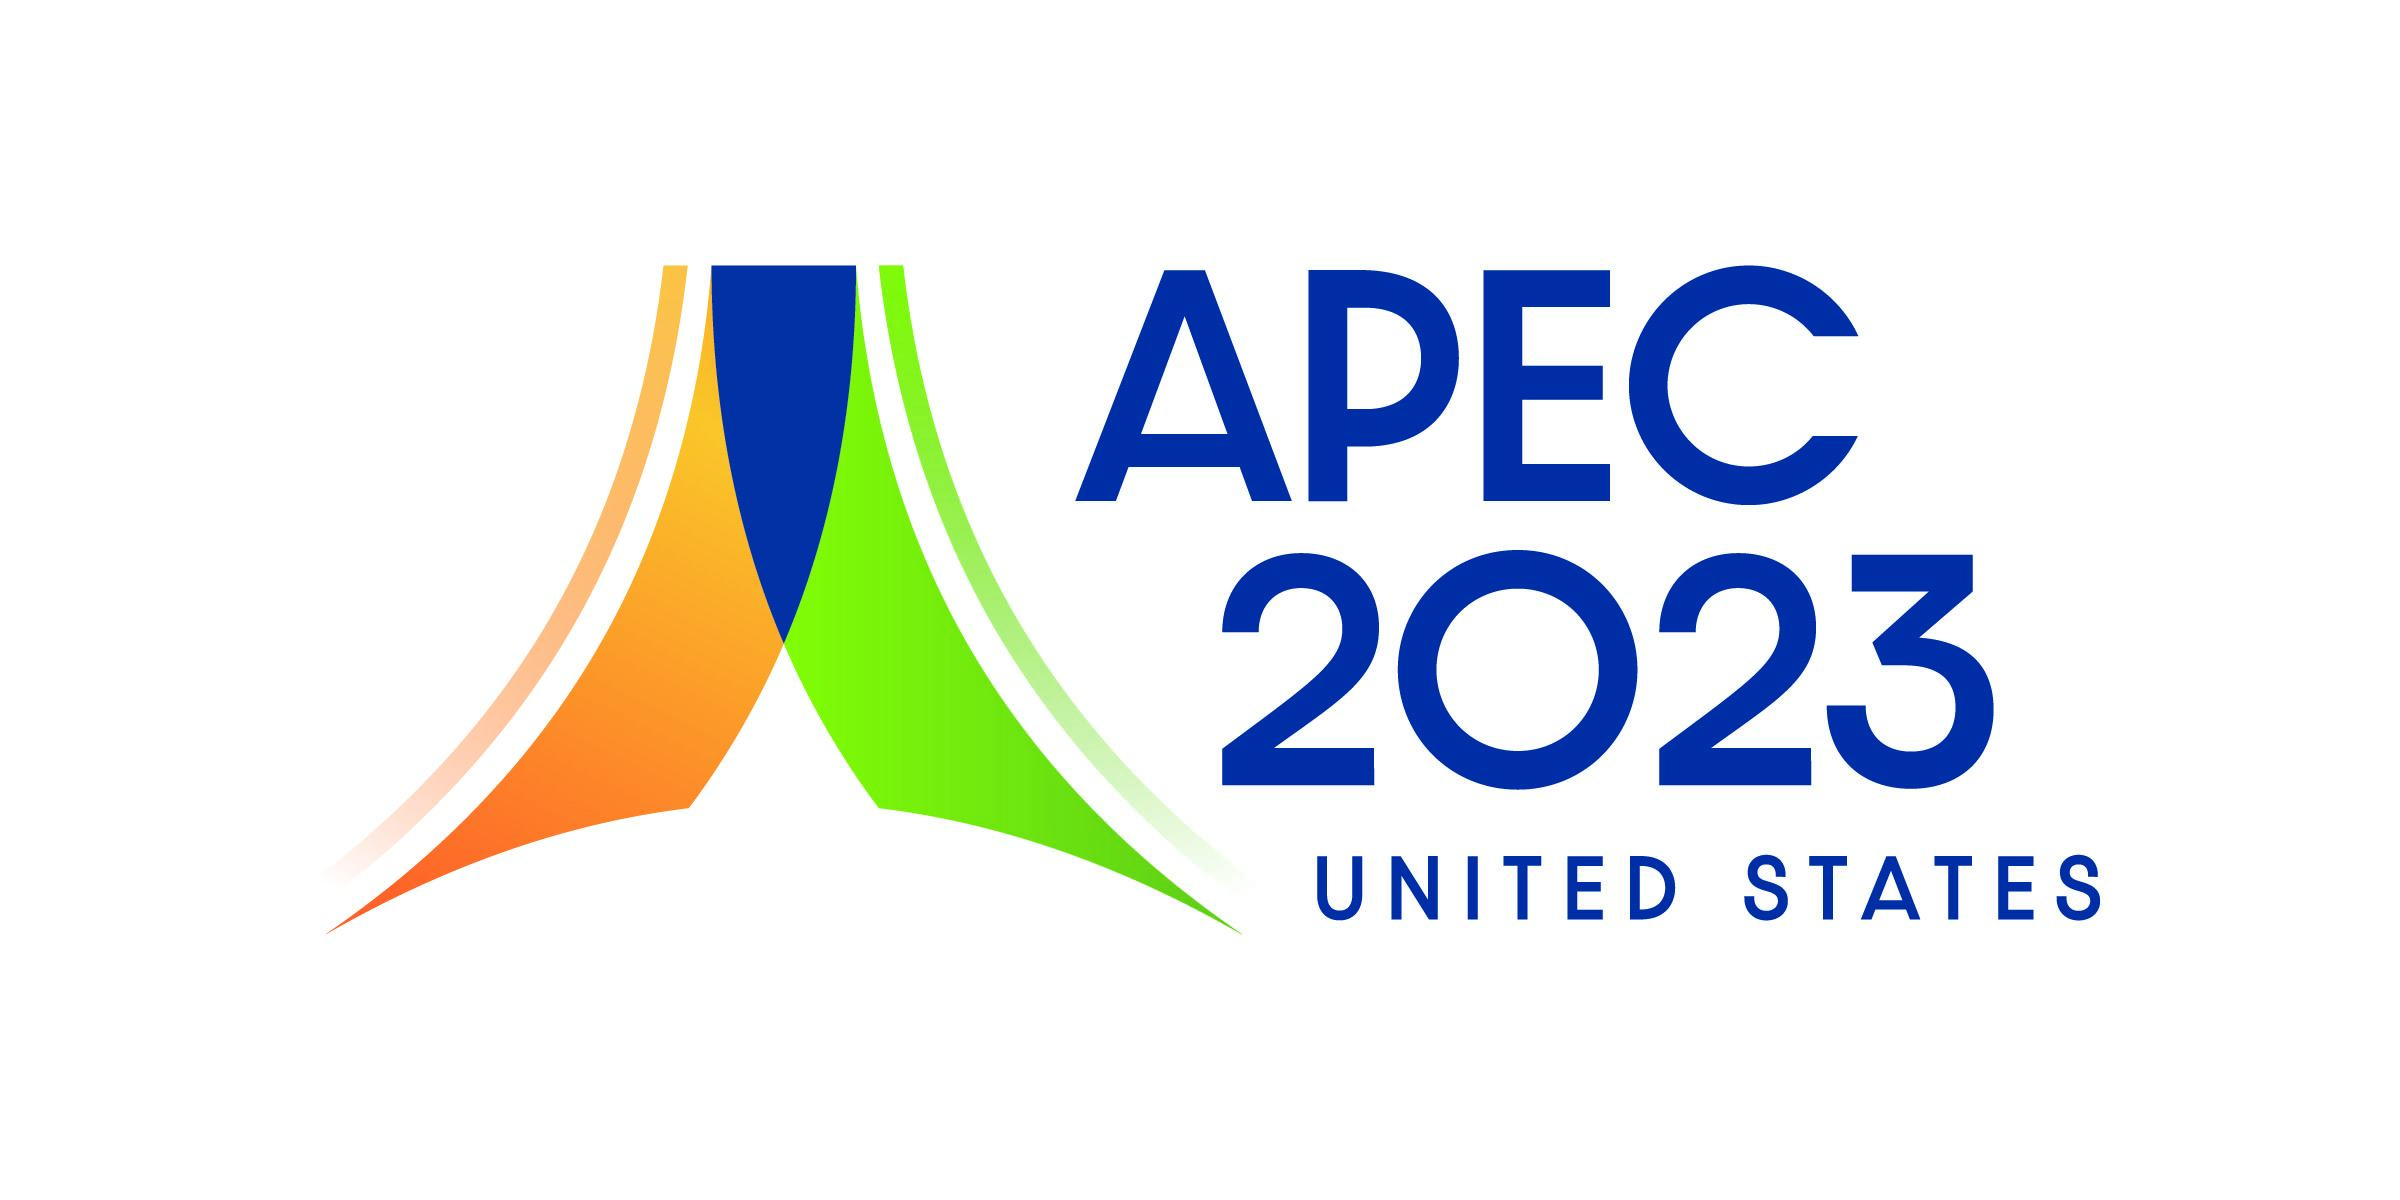 APEC’s 2023 growth seen at 3.3 pct, legacy of pandemic still overshadowing outlook